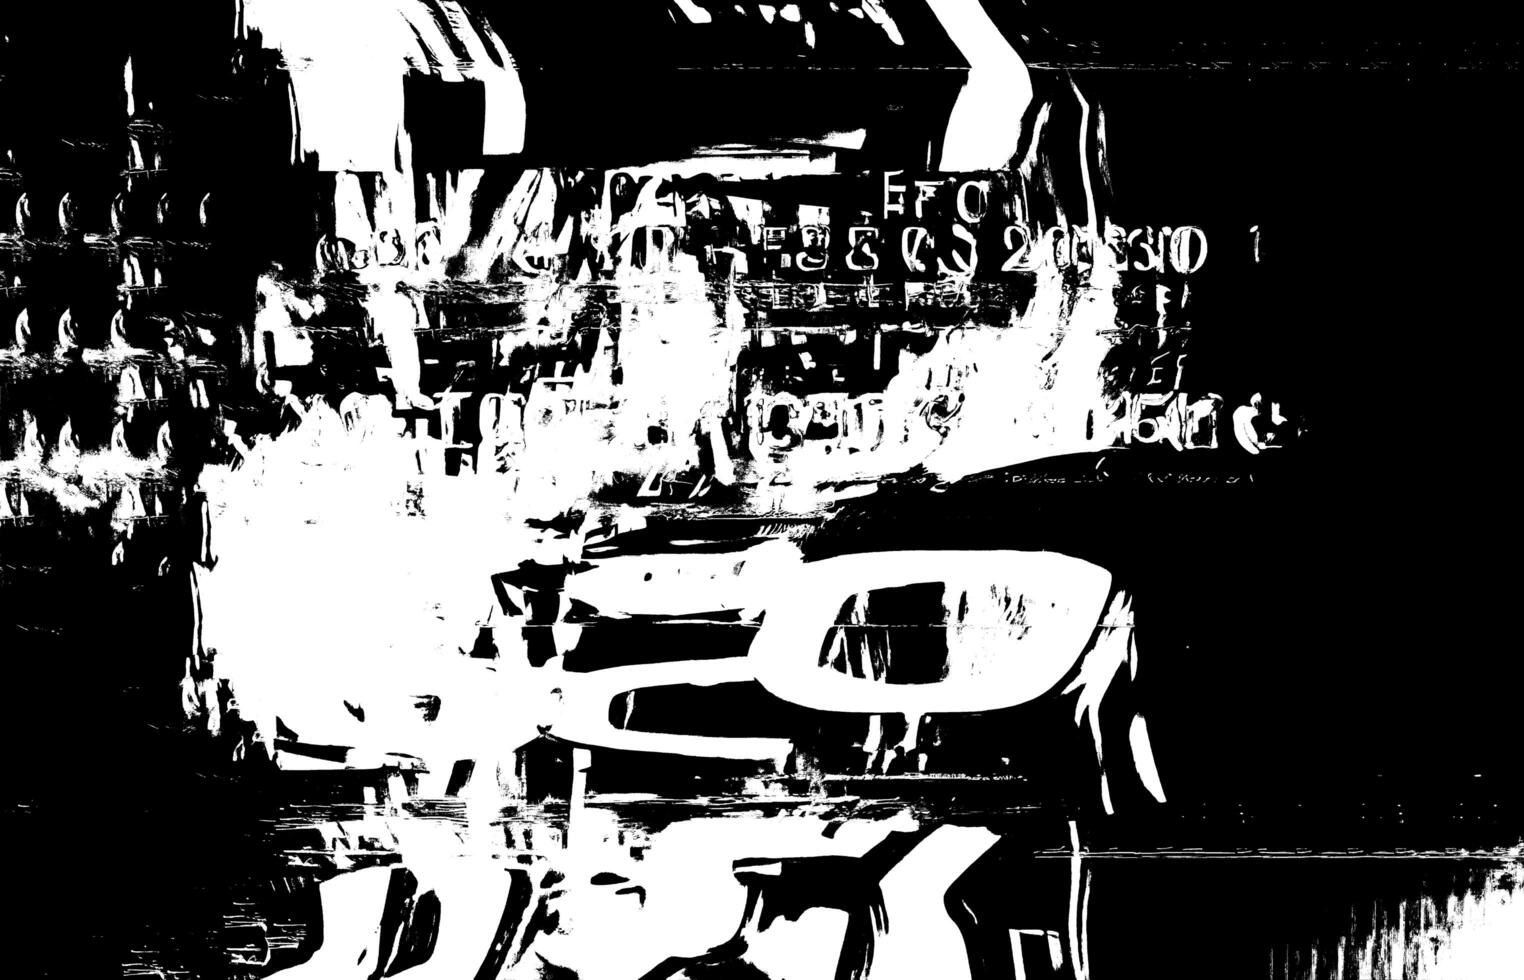 Abstract Noise Black and White Glitchy Grunge with Distorted Textures and Vintage Aesthetics for Abstract Digital and Print Design photo